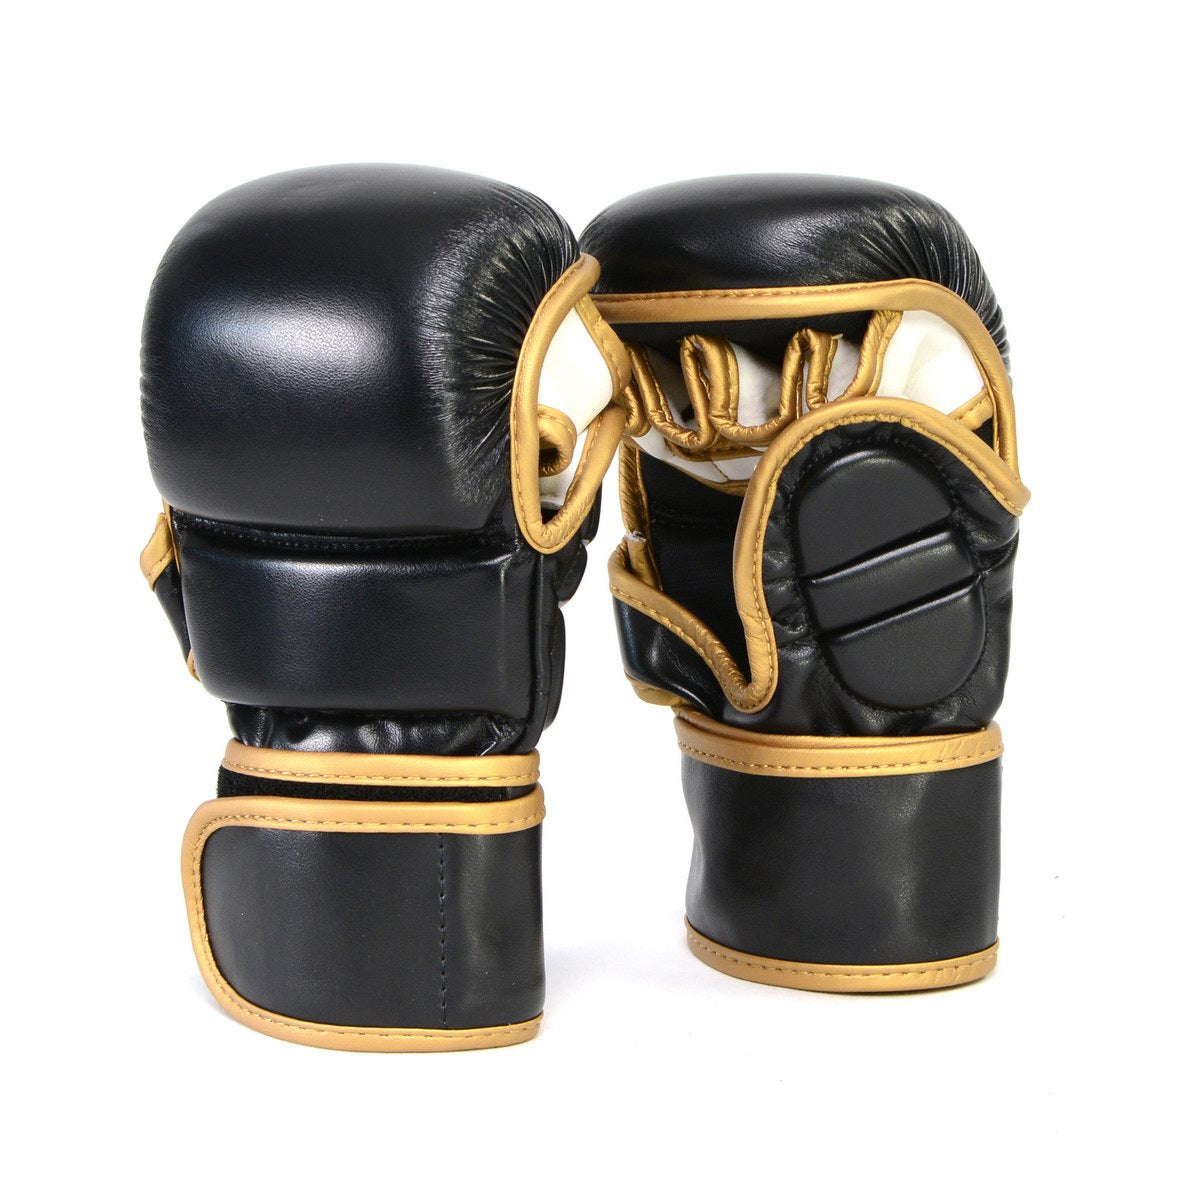 7 – Sparring MMA X-Fitness oz XF2001 Gloves-BLK/COPPER Hybrid